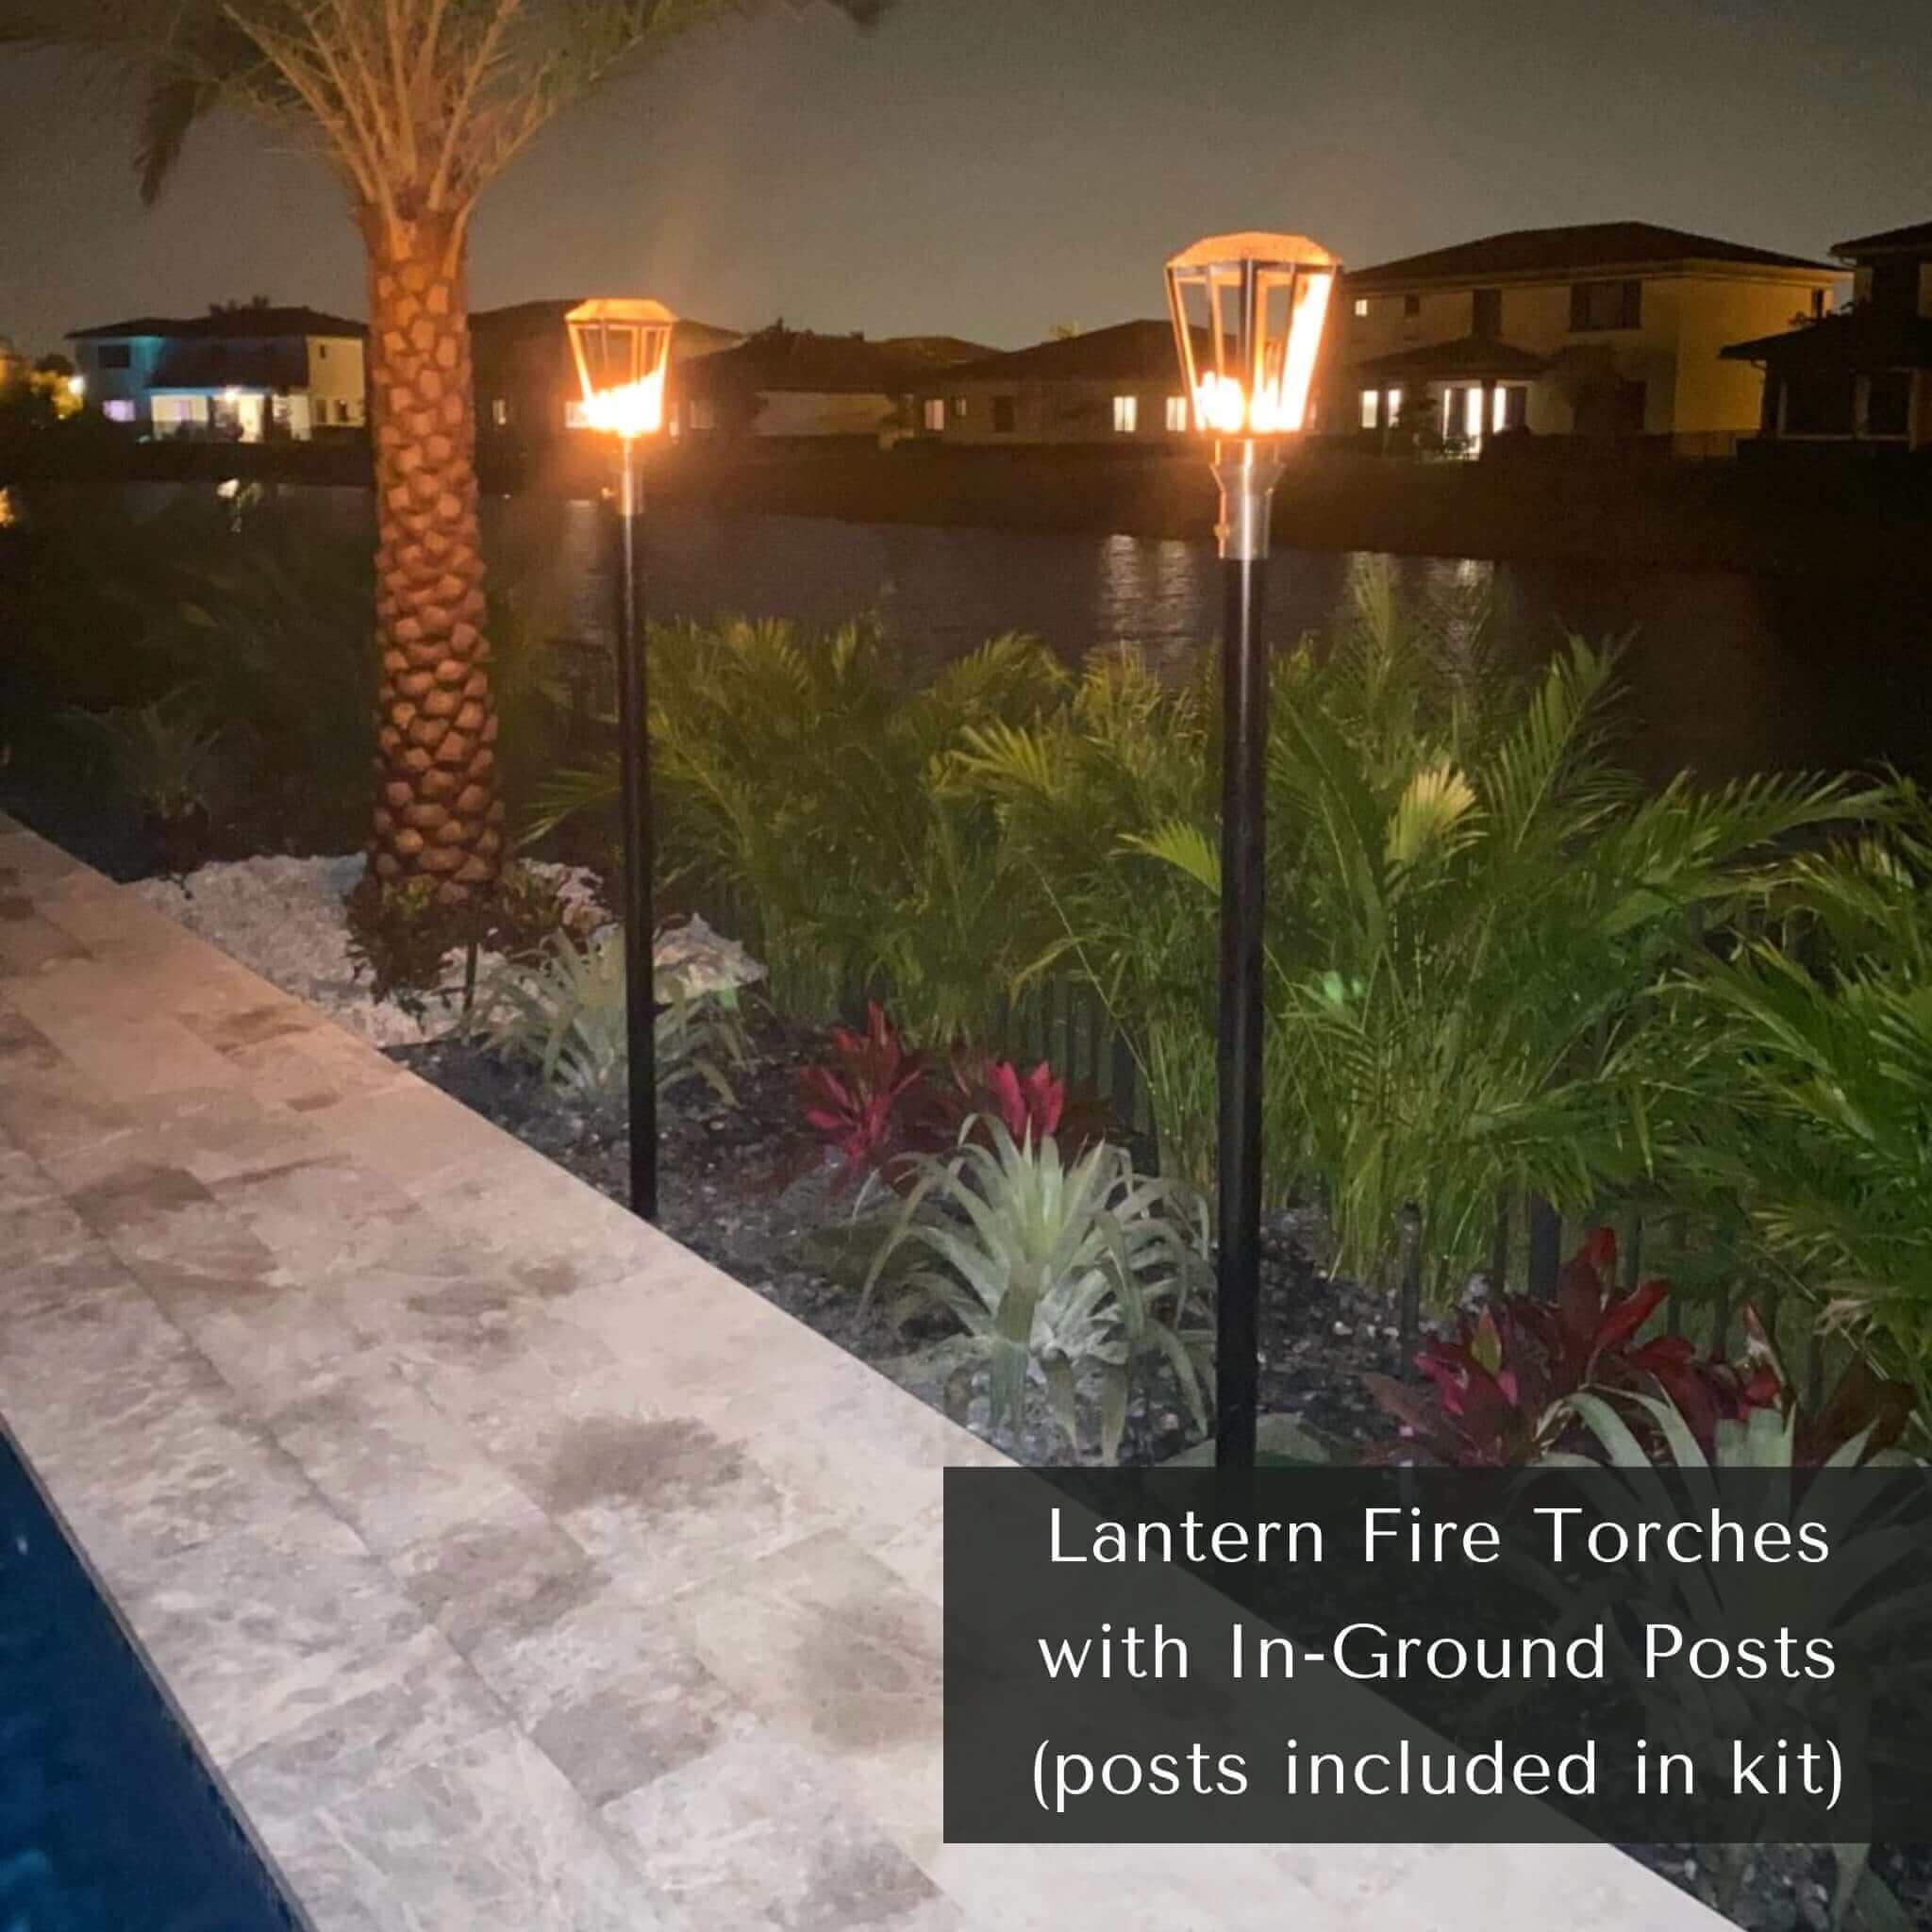 Urn Fire Torch COMPLETE KIT - Stainless Steel - The Outdoor Plus